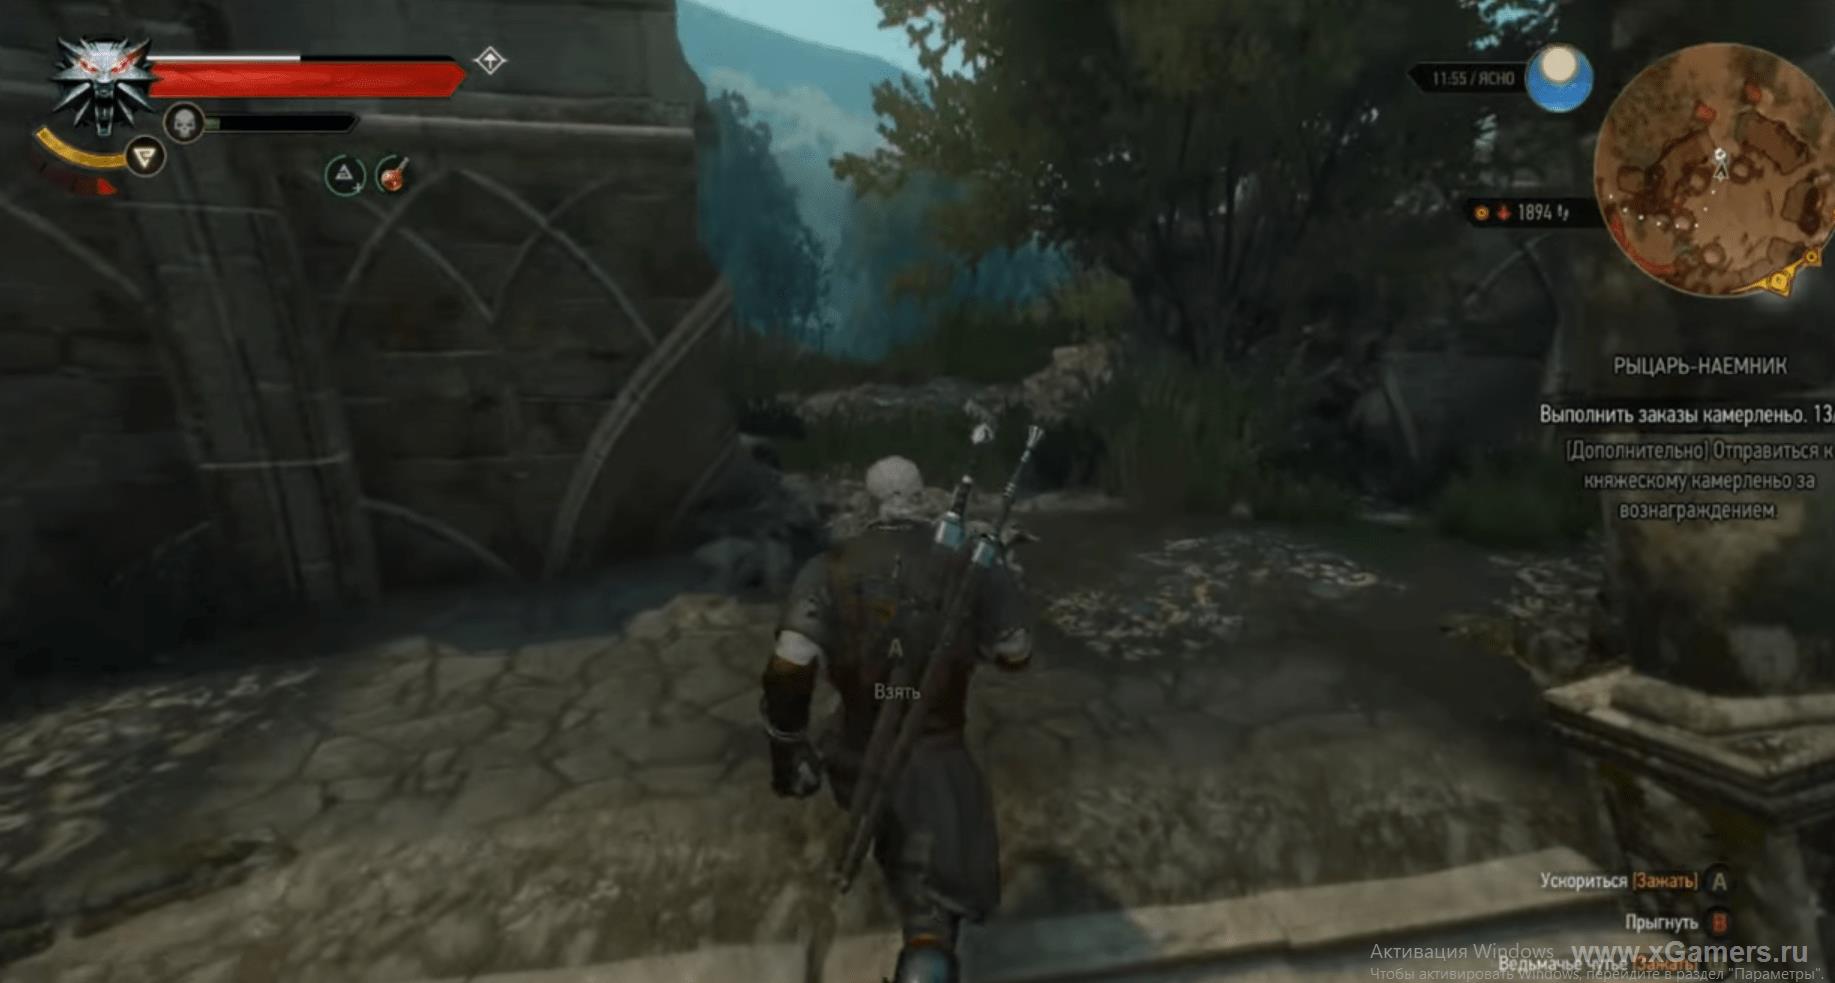 Amphitheater location - The Witcher 3